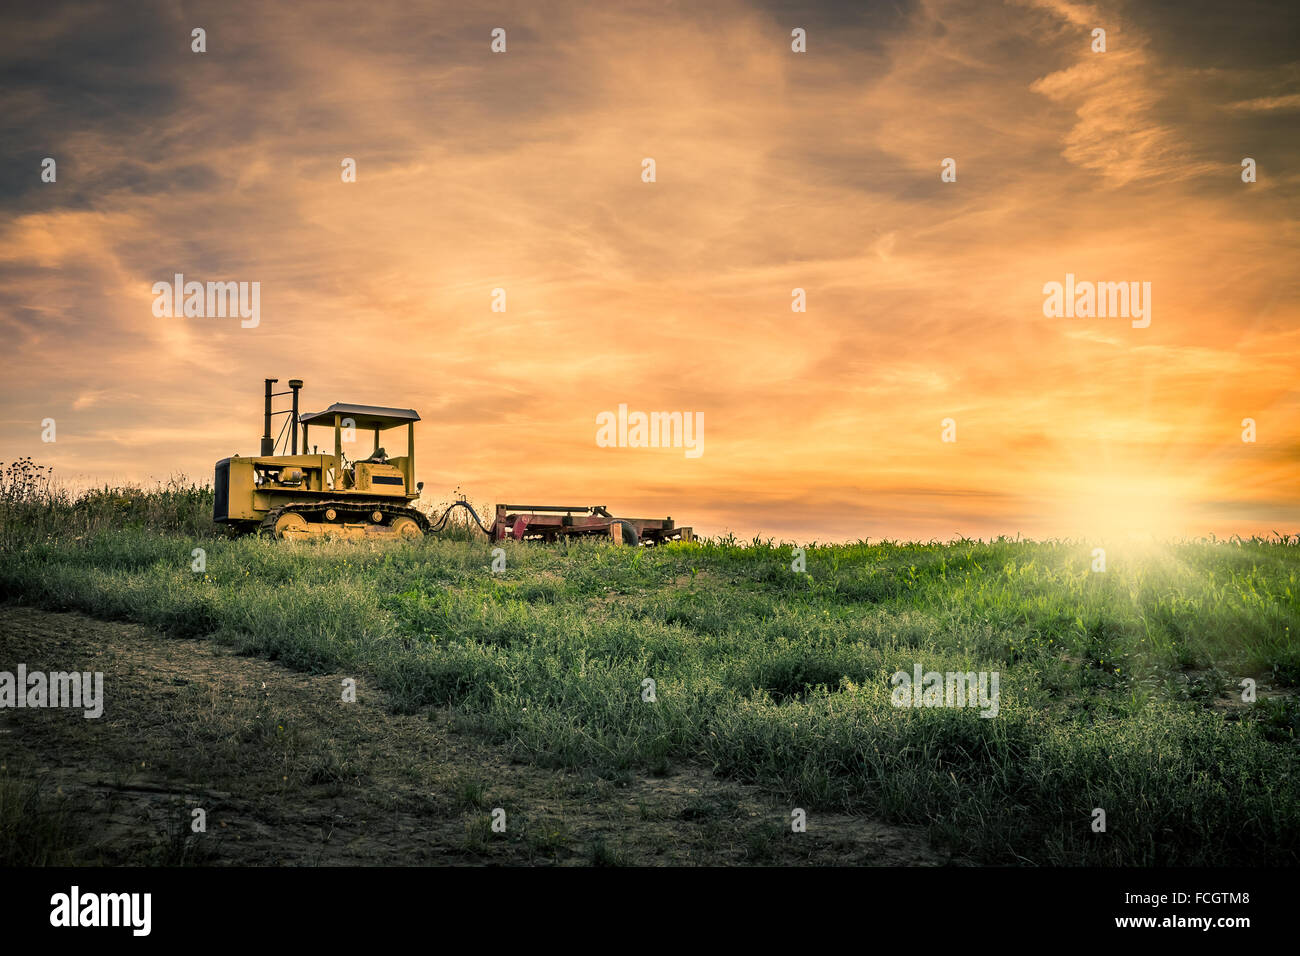 Tractor and amazing sunset with dramatic sky Stock Photo